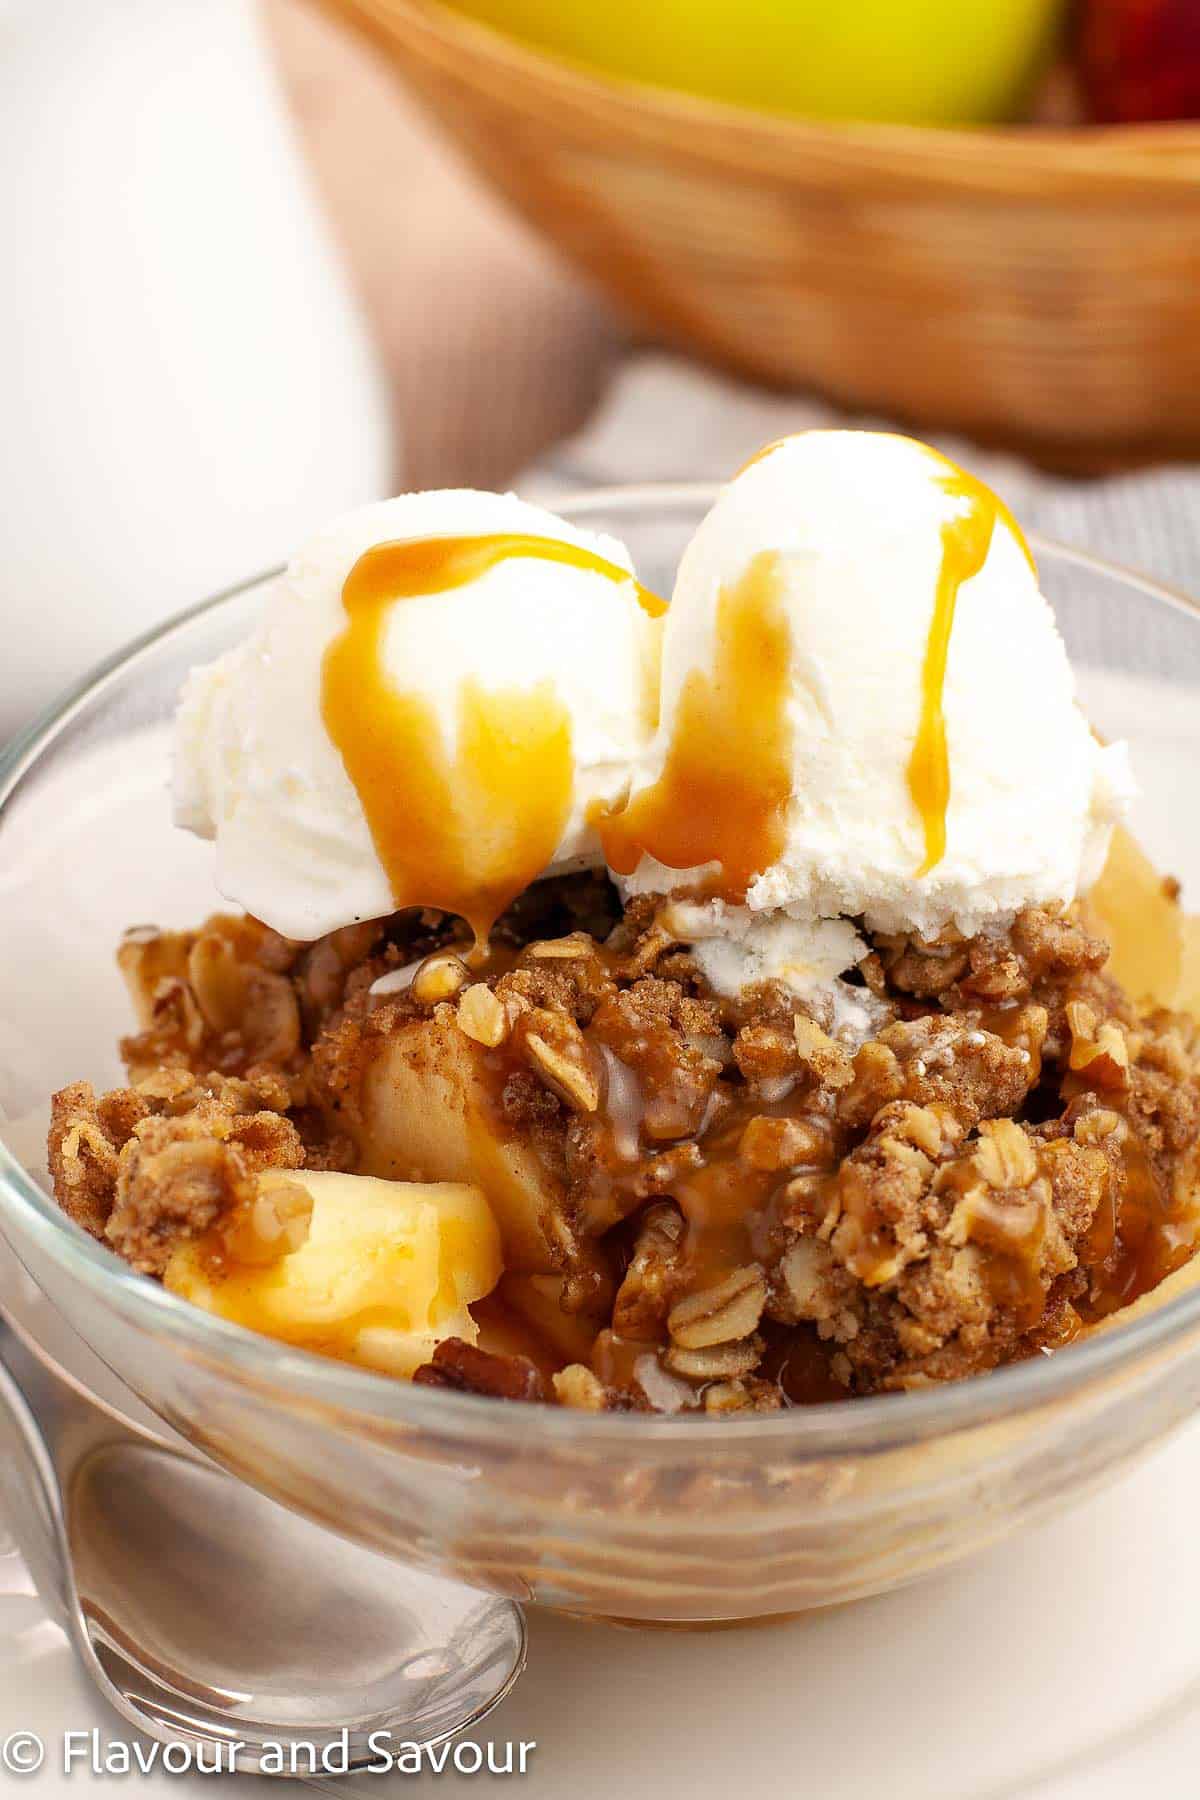 A bowl of gluten-free apple pecan crisp topped with ice cream and caramel sauce.